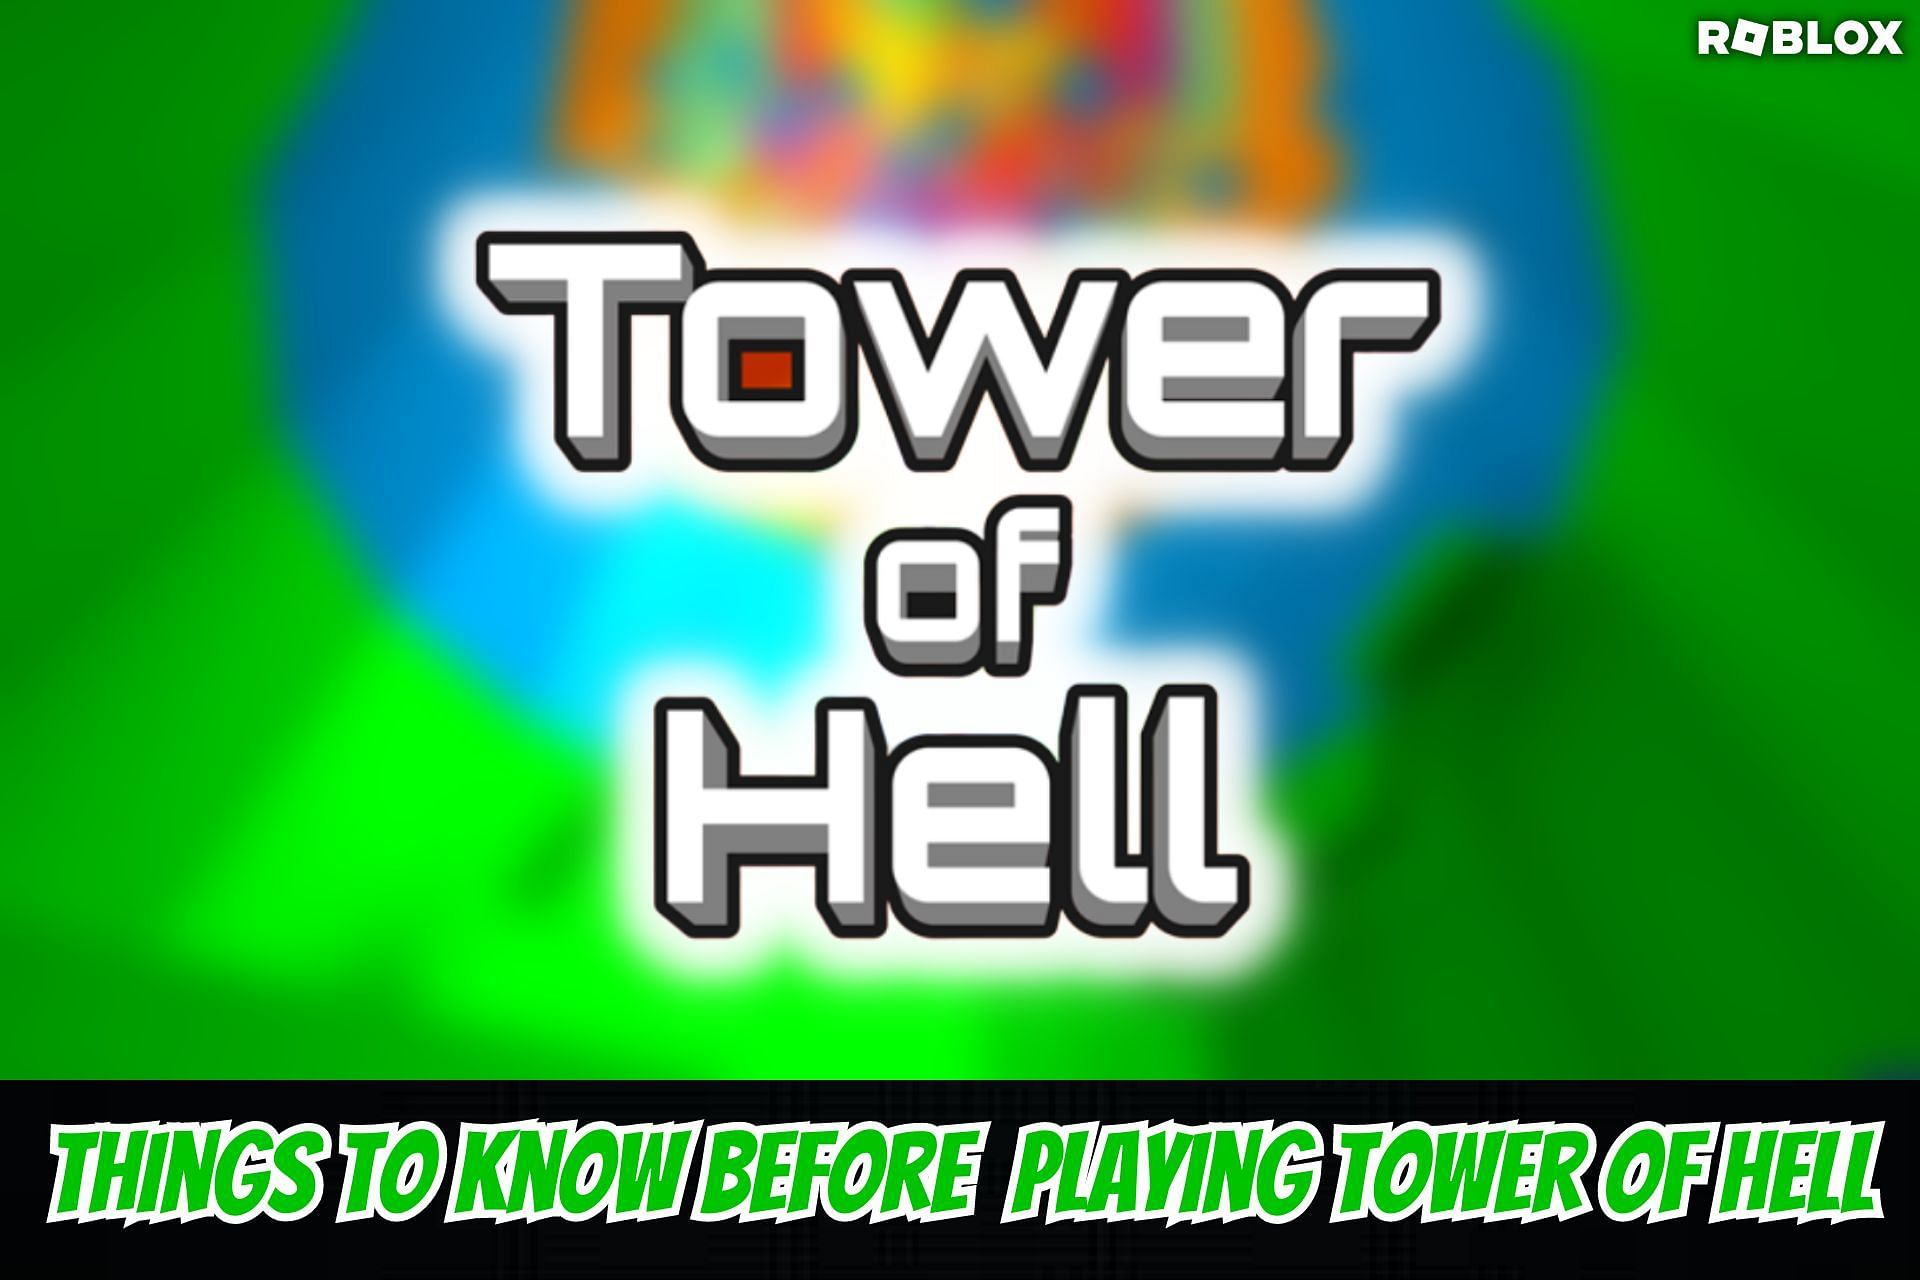 Climb, Tower of Hell Wiki